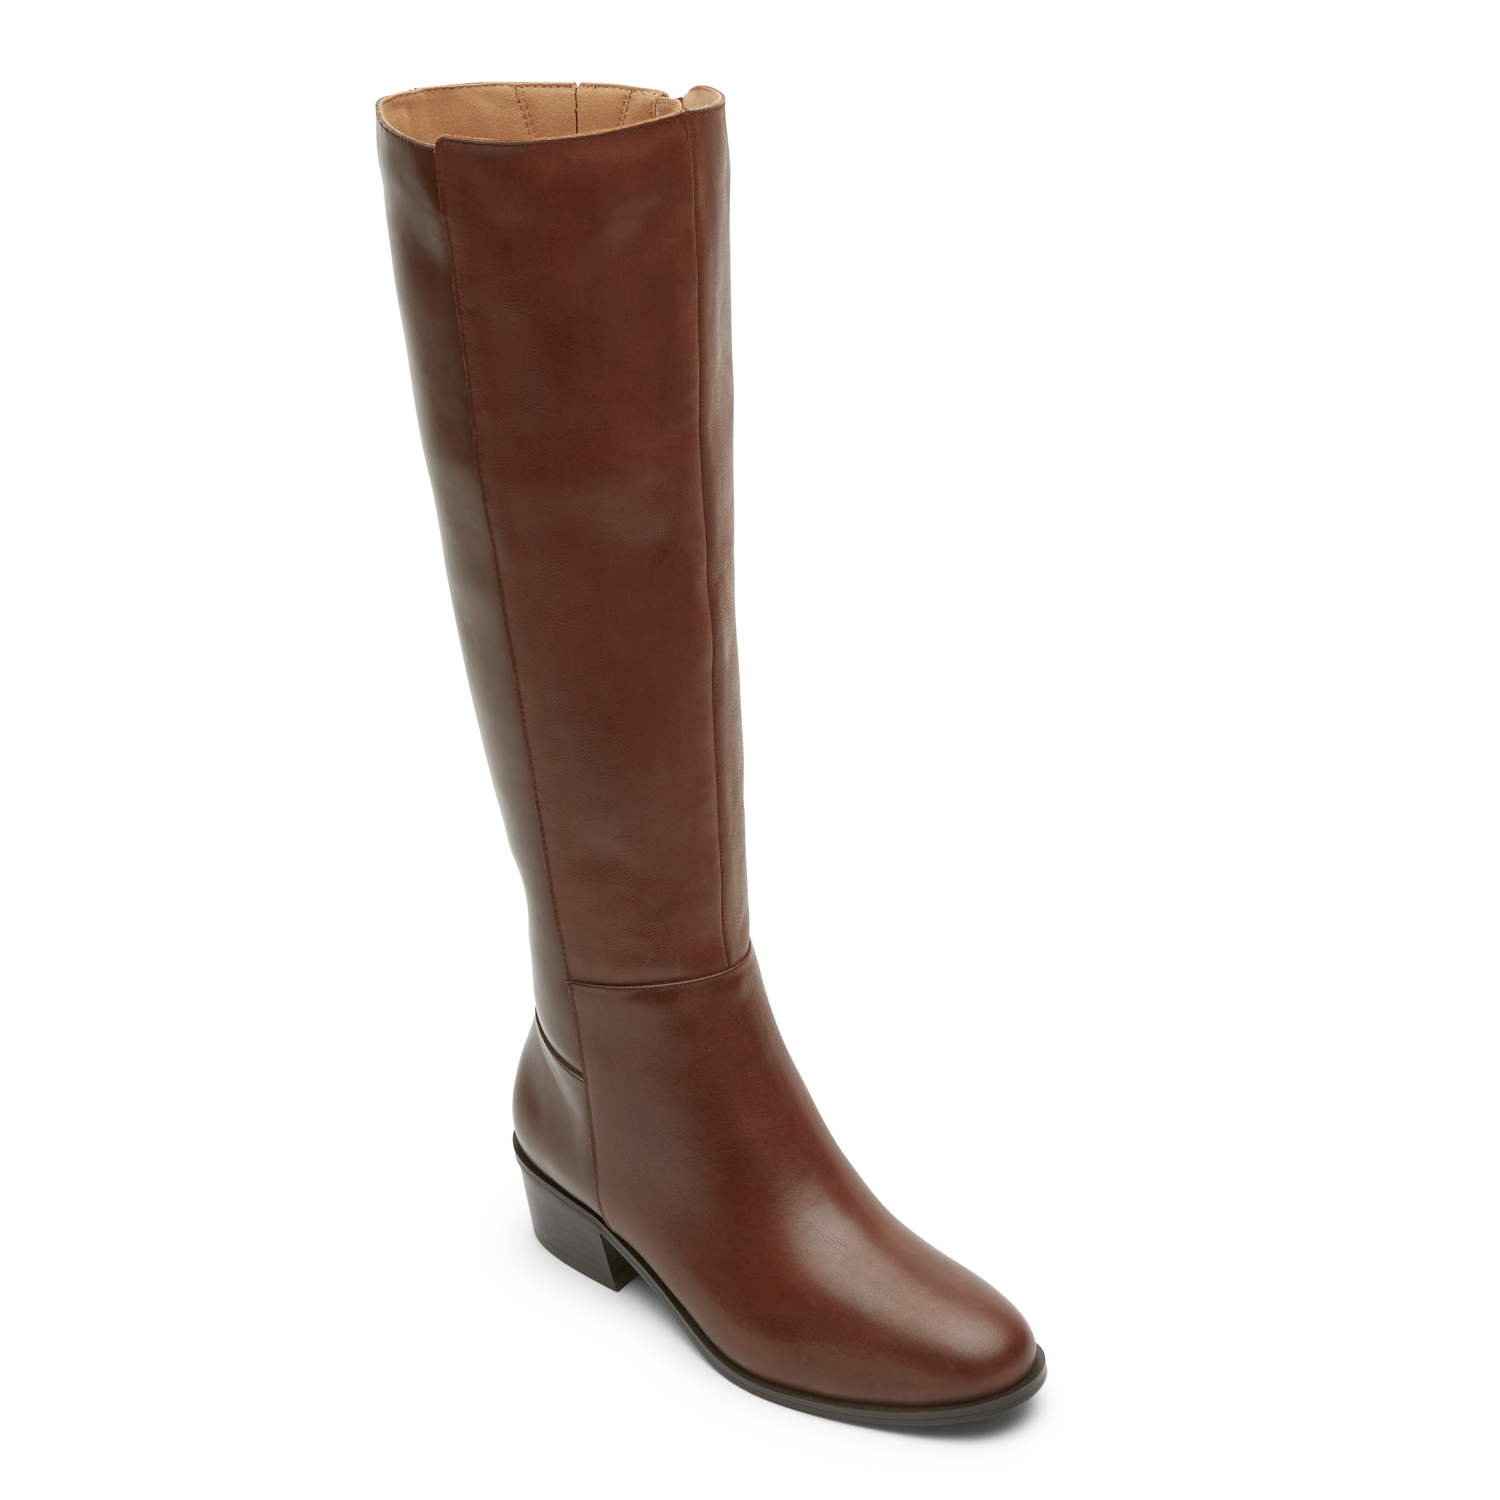 Rockport Womens Evalyn Tall Wide Calf Boot